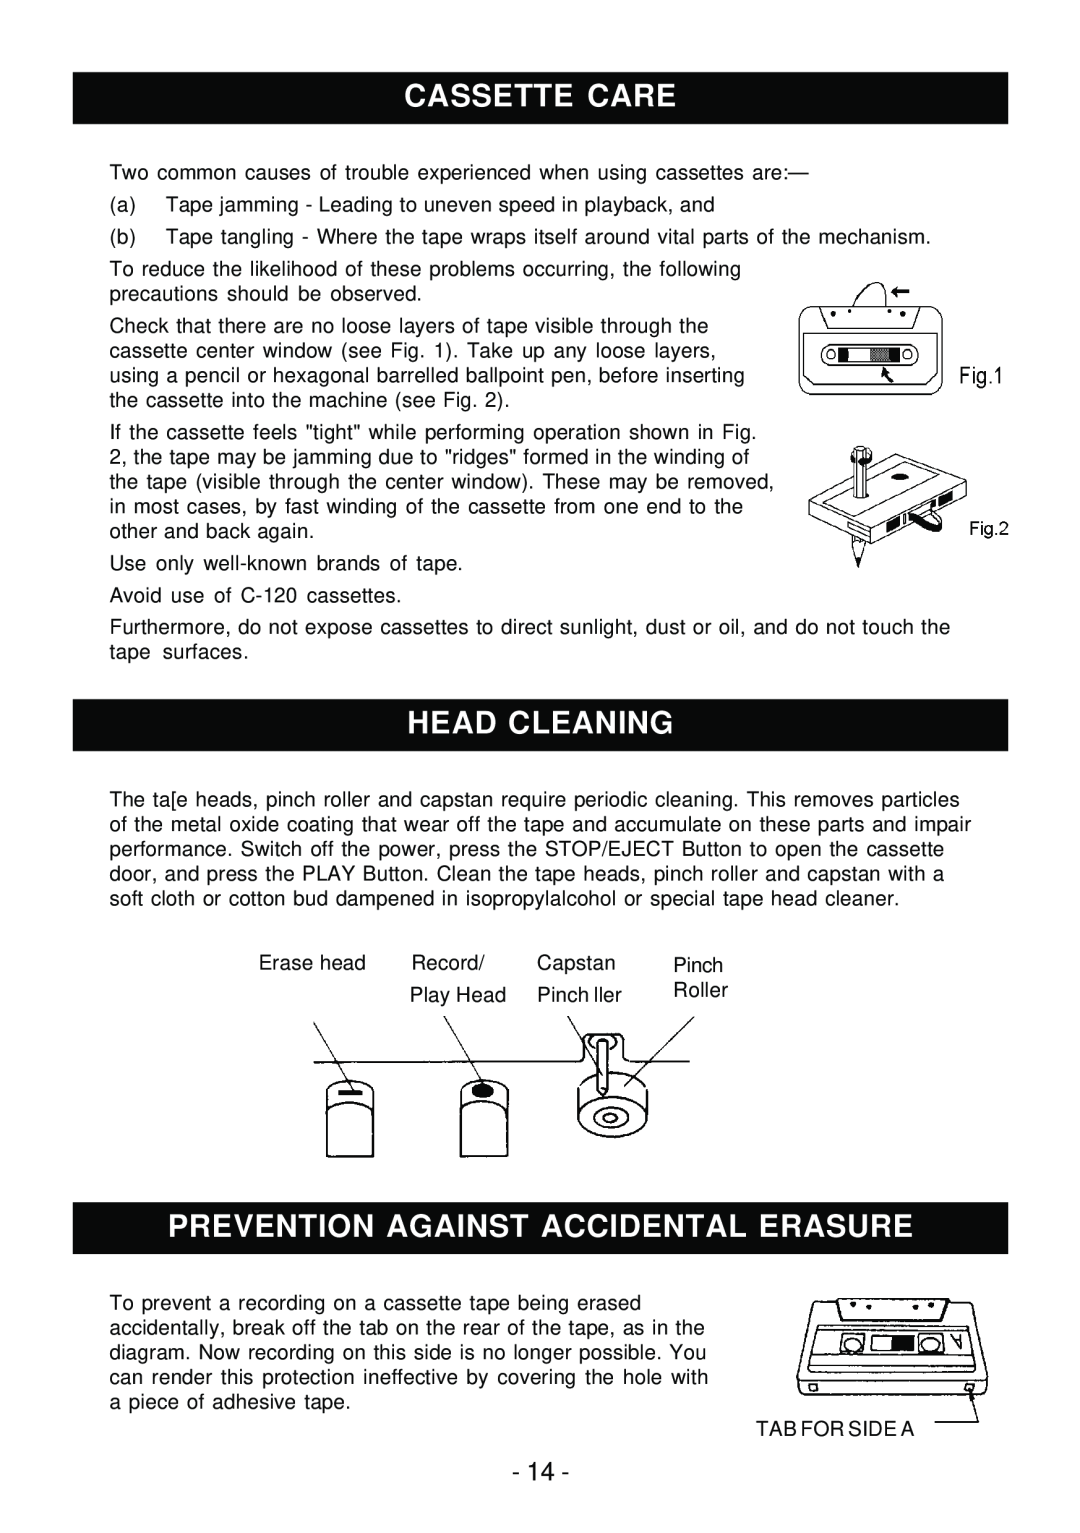 Sylvania SRCD858 instruction manual Cassette Care, Head Cleaning, Prevention Against Accidental Erasure 